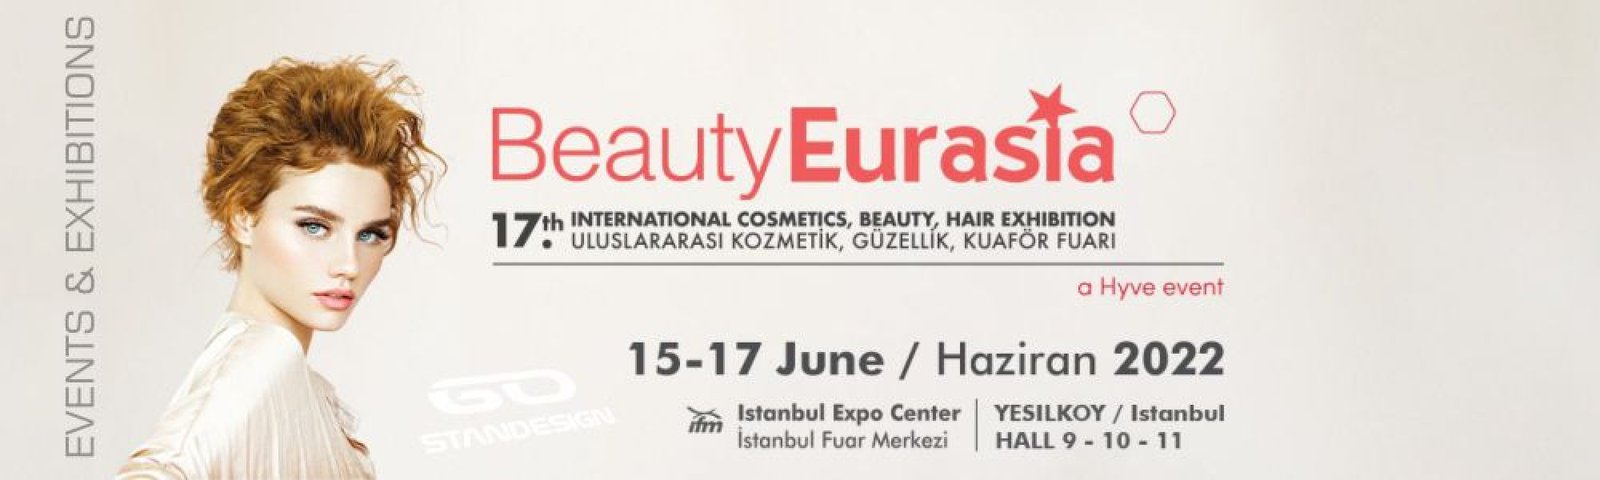 Beauty Eurasia 2022 - Stand Design, Construction and Decoration Services